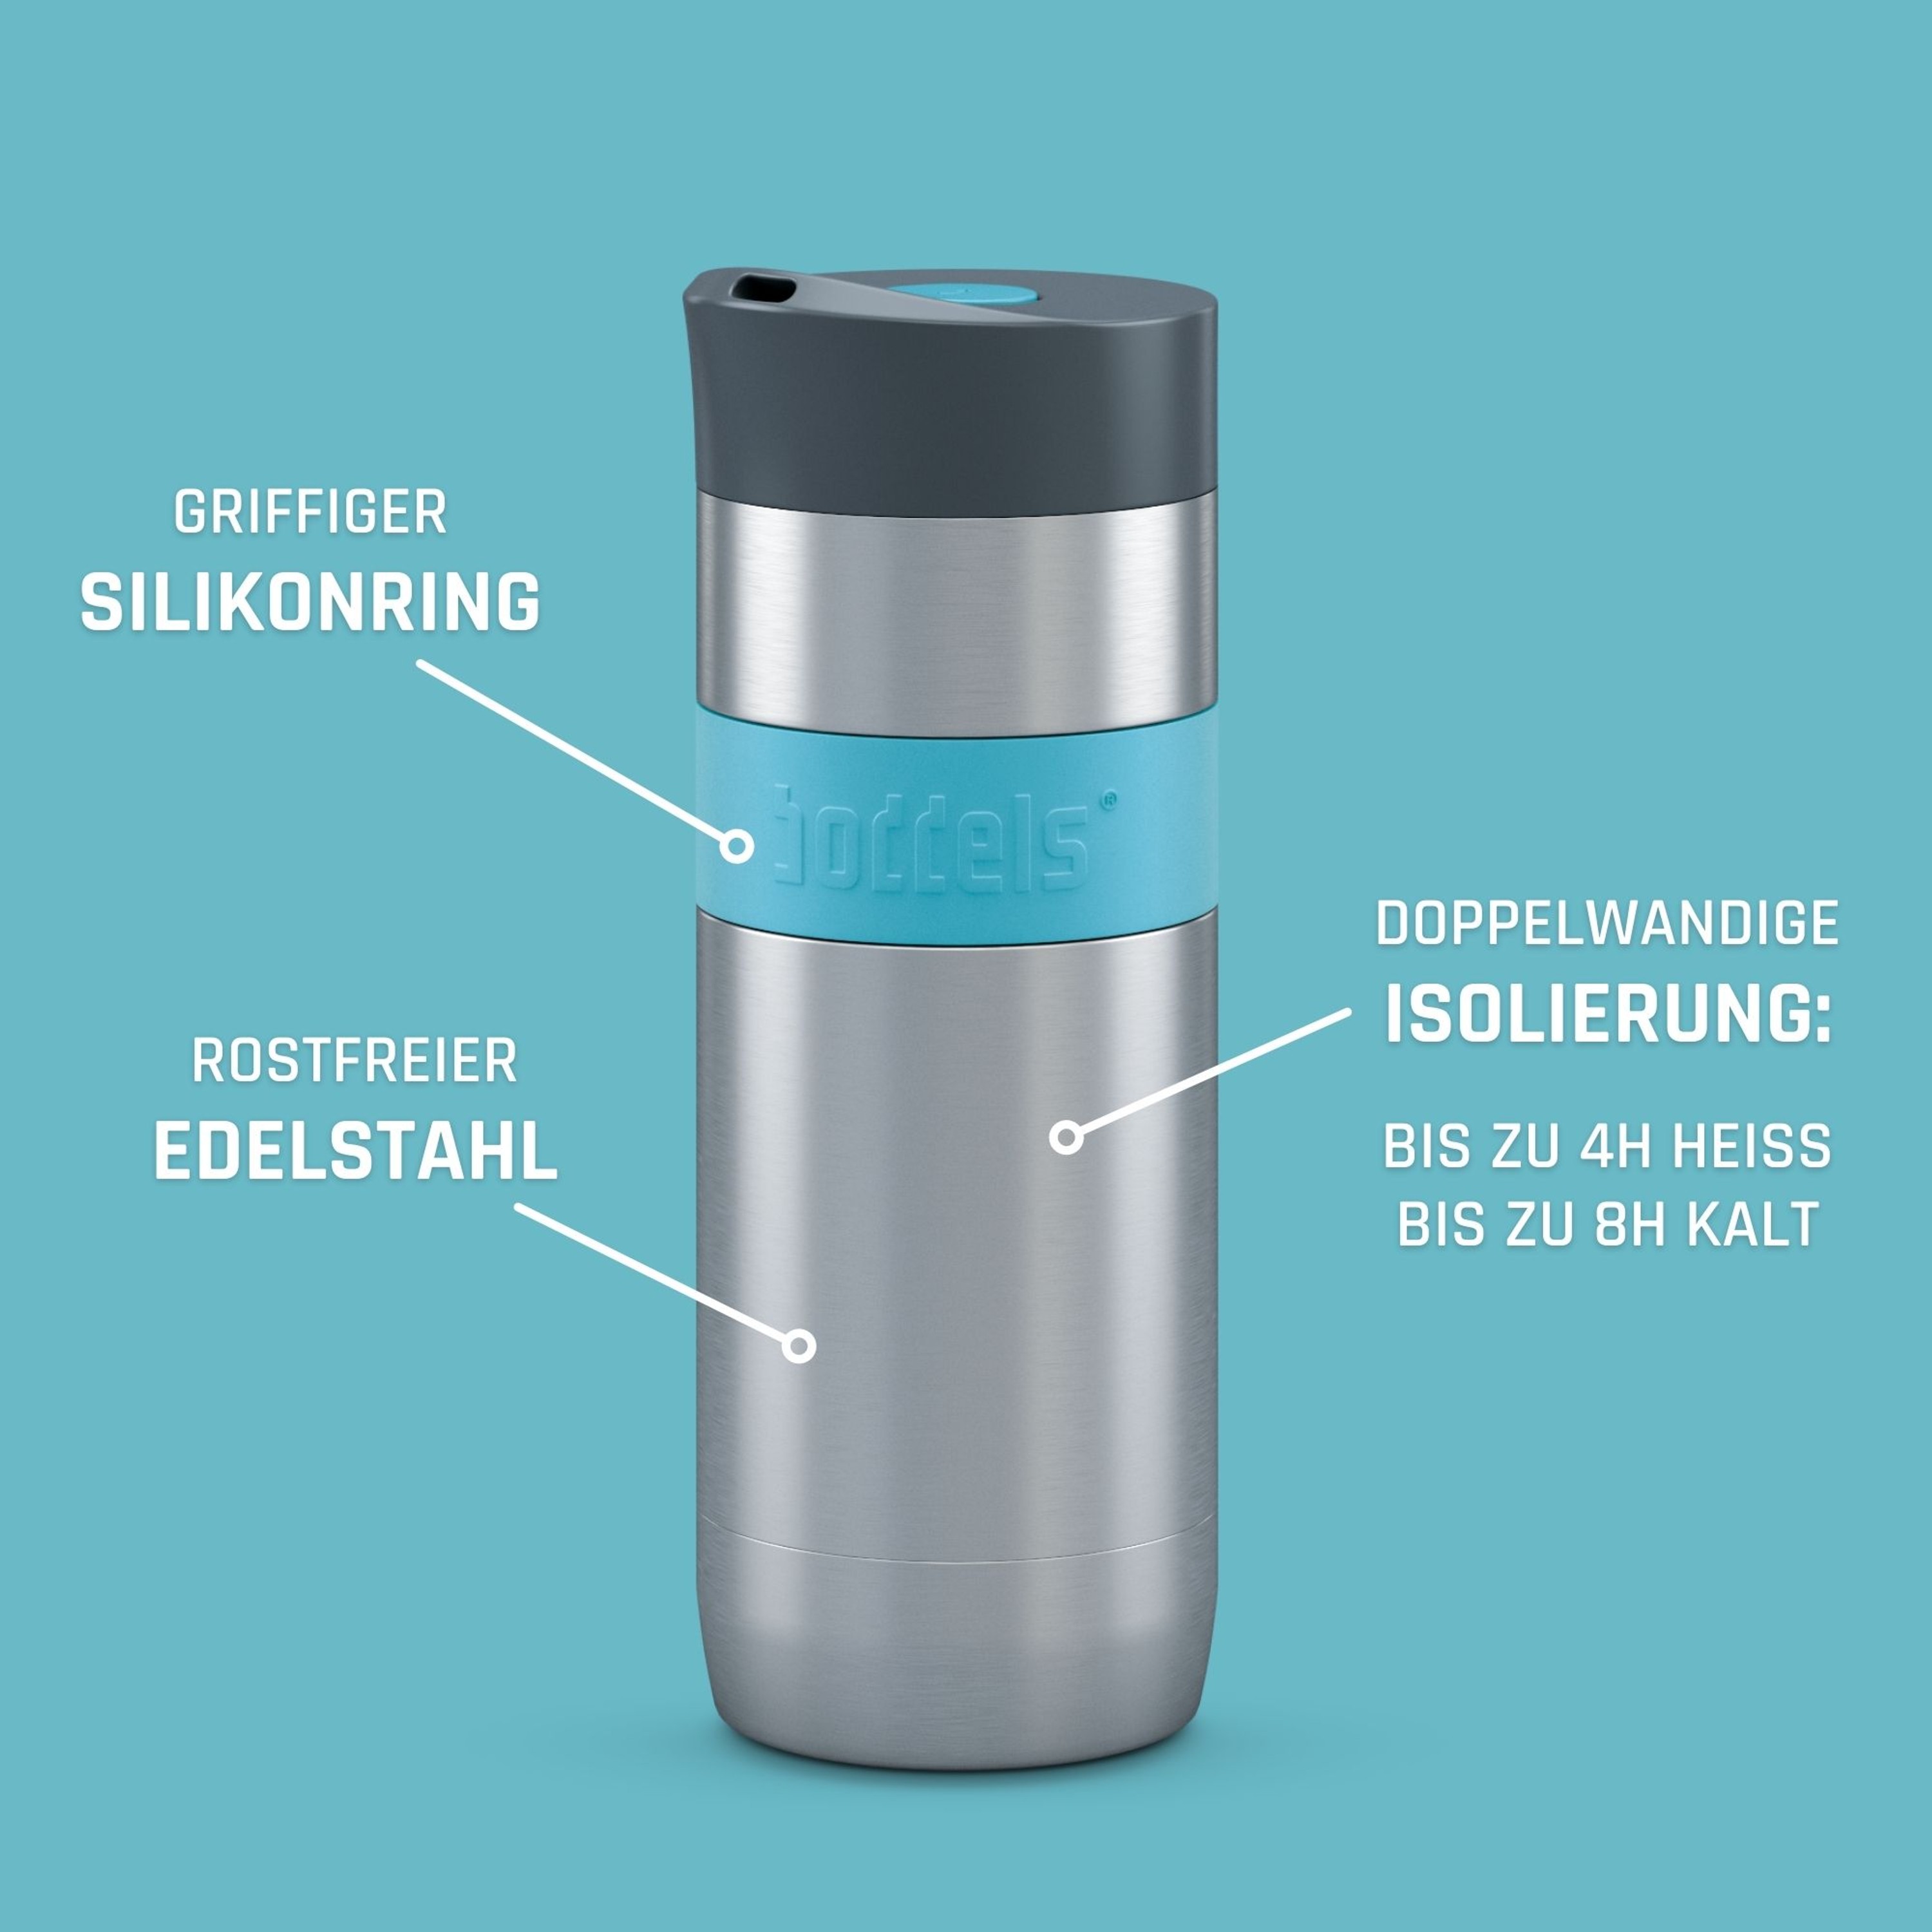 Thermobecher KOFFJE für warme Getränke - life | boddels Made for